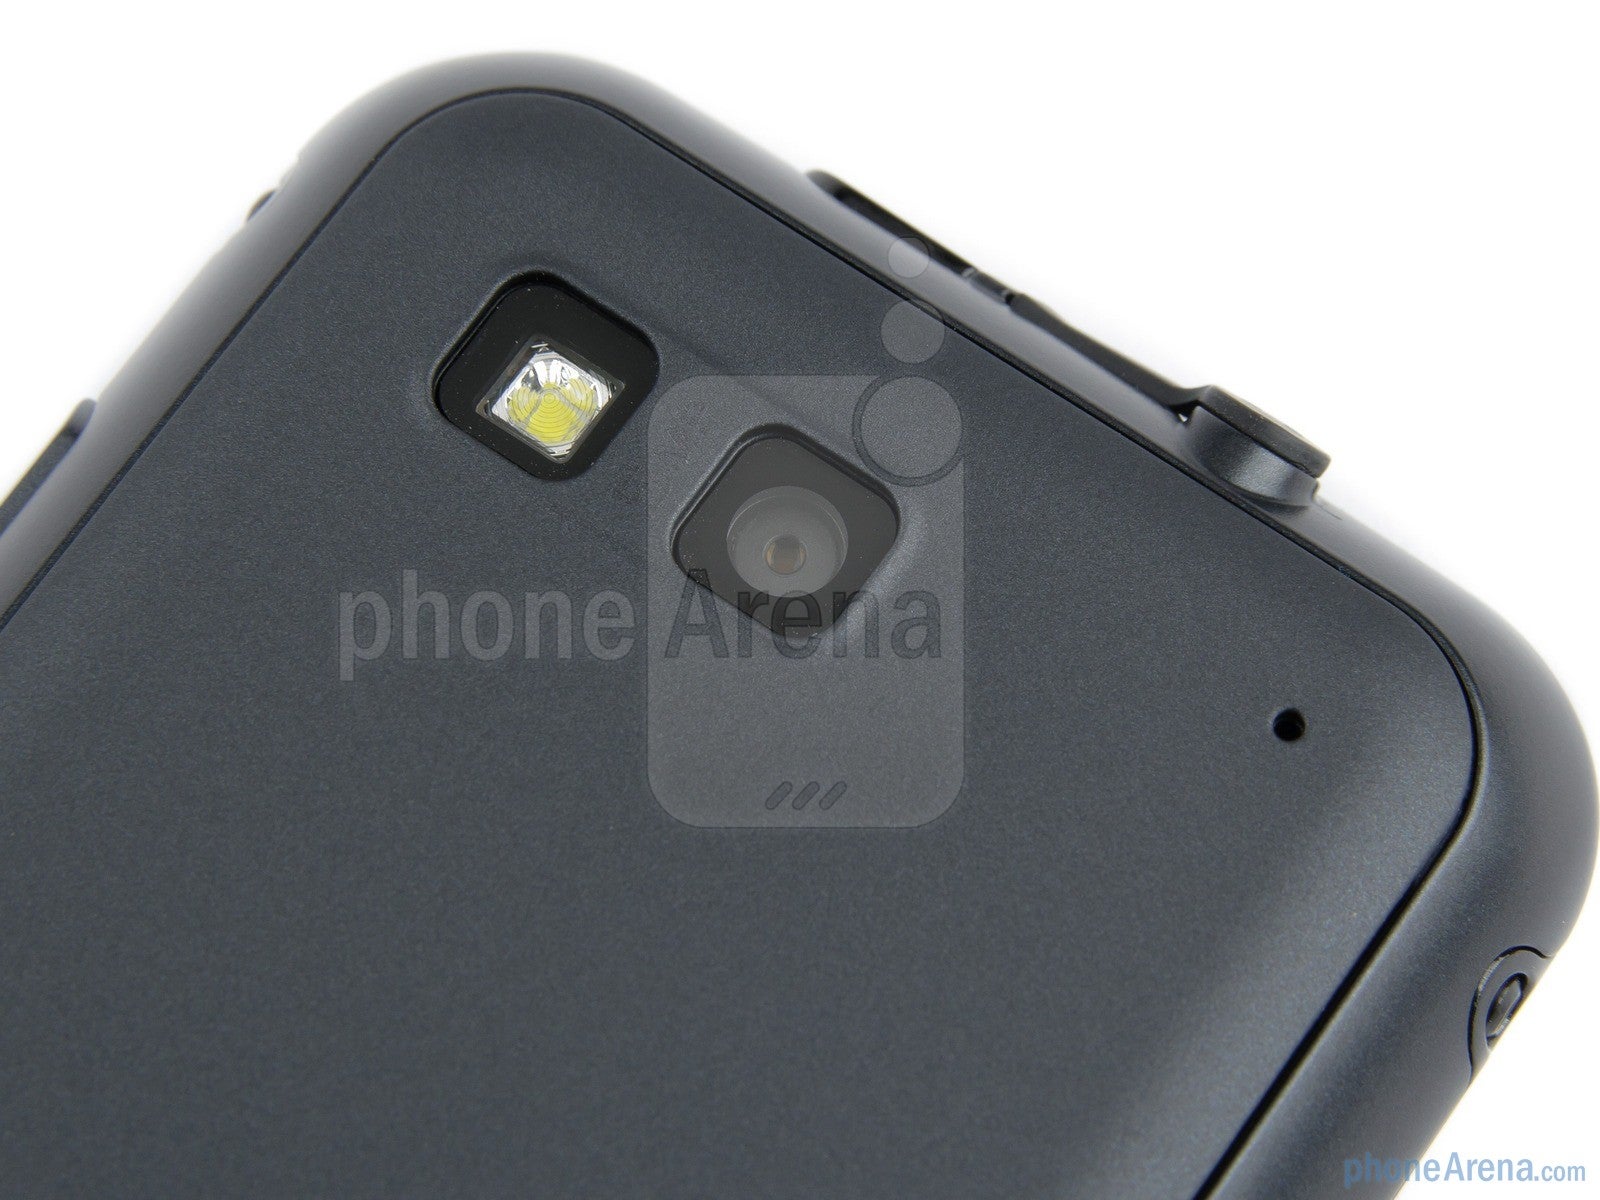 The 5-megapixel camera on the back - Motorola DEFY+ Review